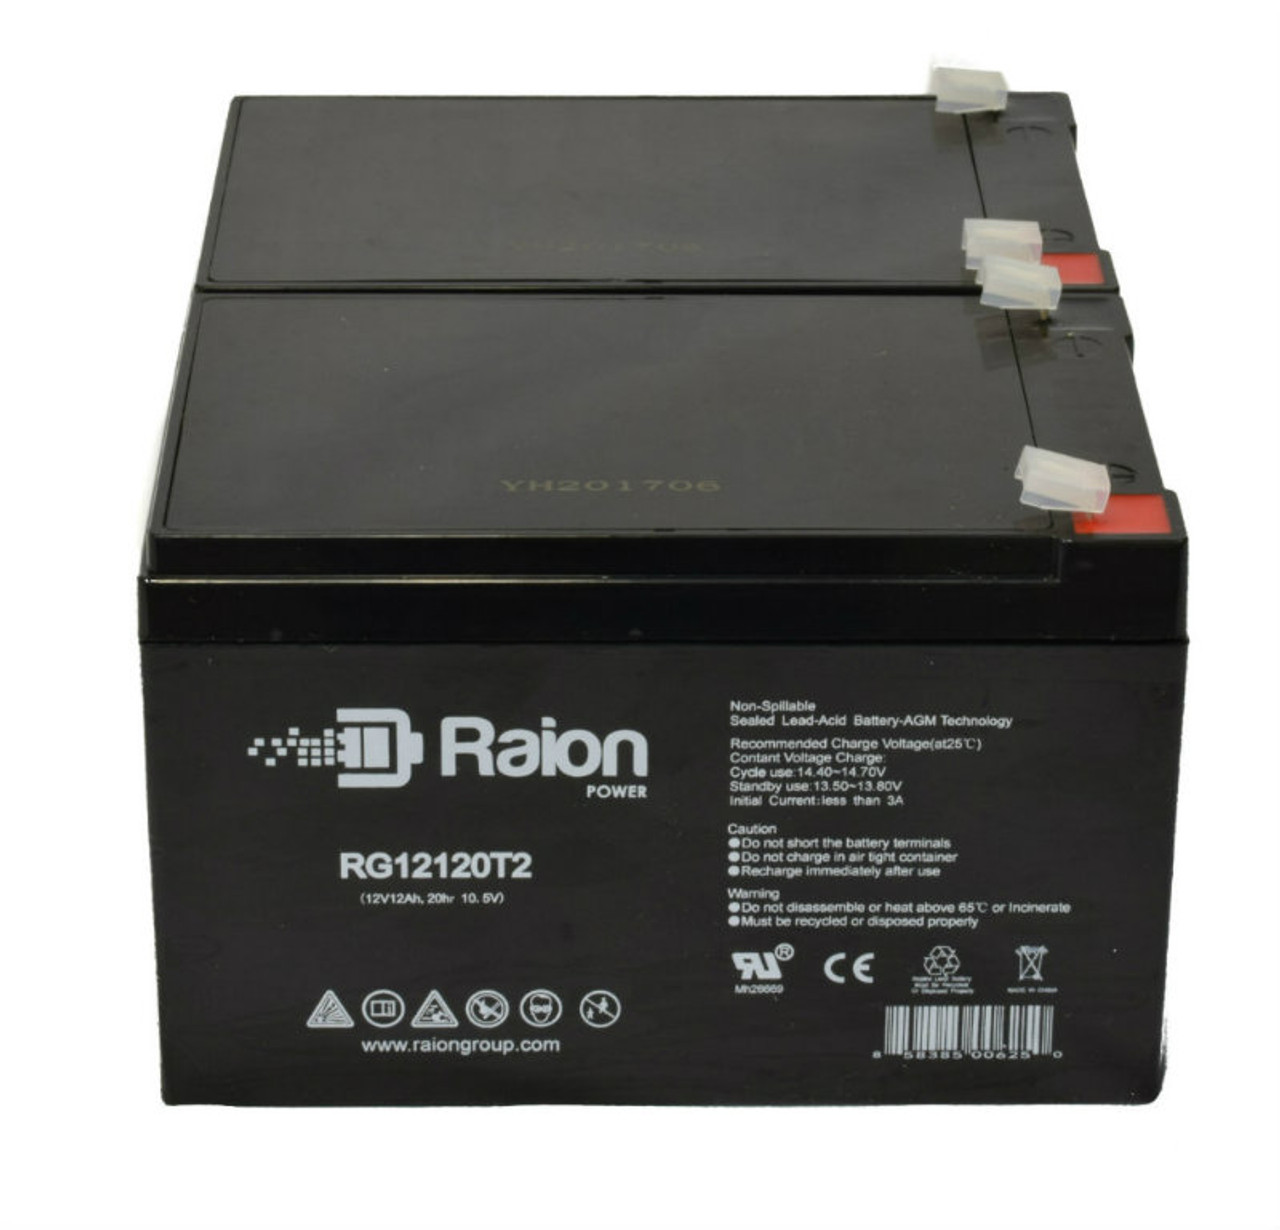 Raion Power 12V 12Ah Non-Spillable Compatible Replacement Battery for Delta DT 1212 - (2 Pack)